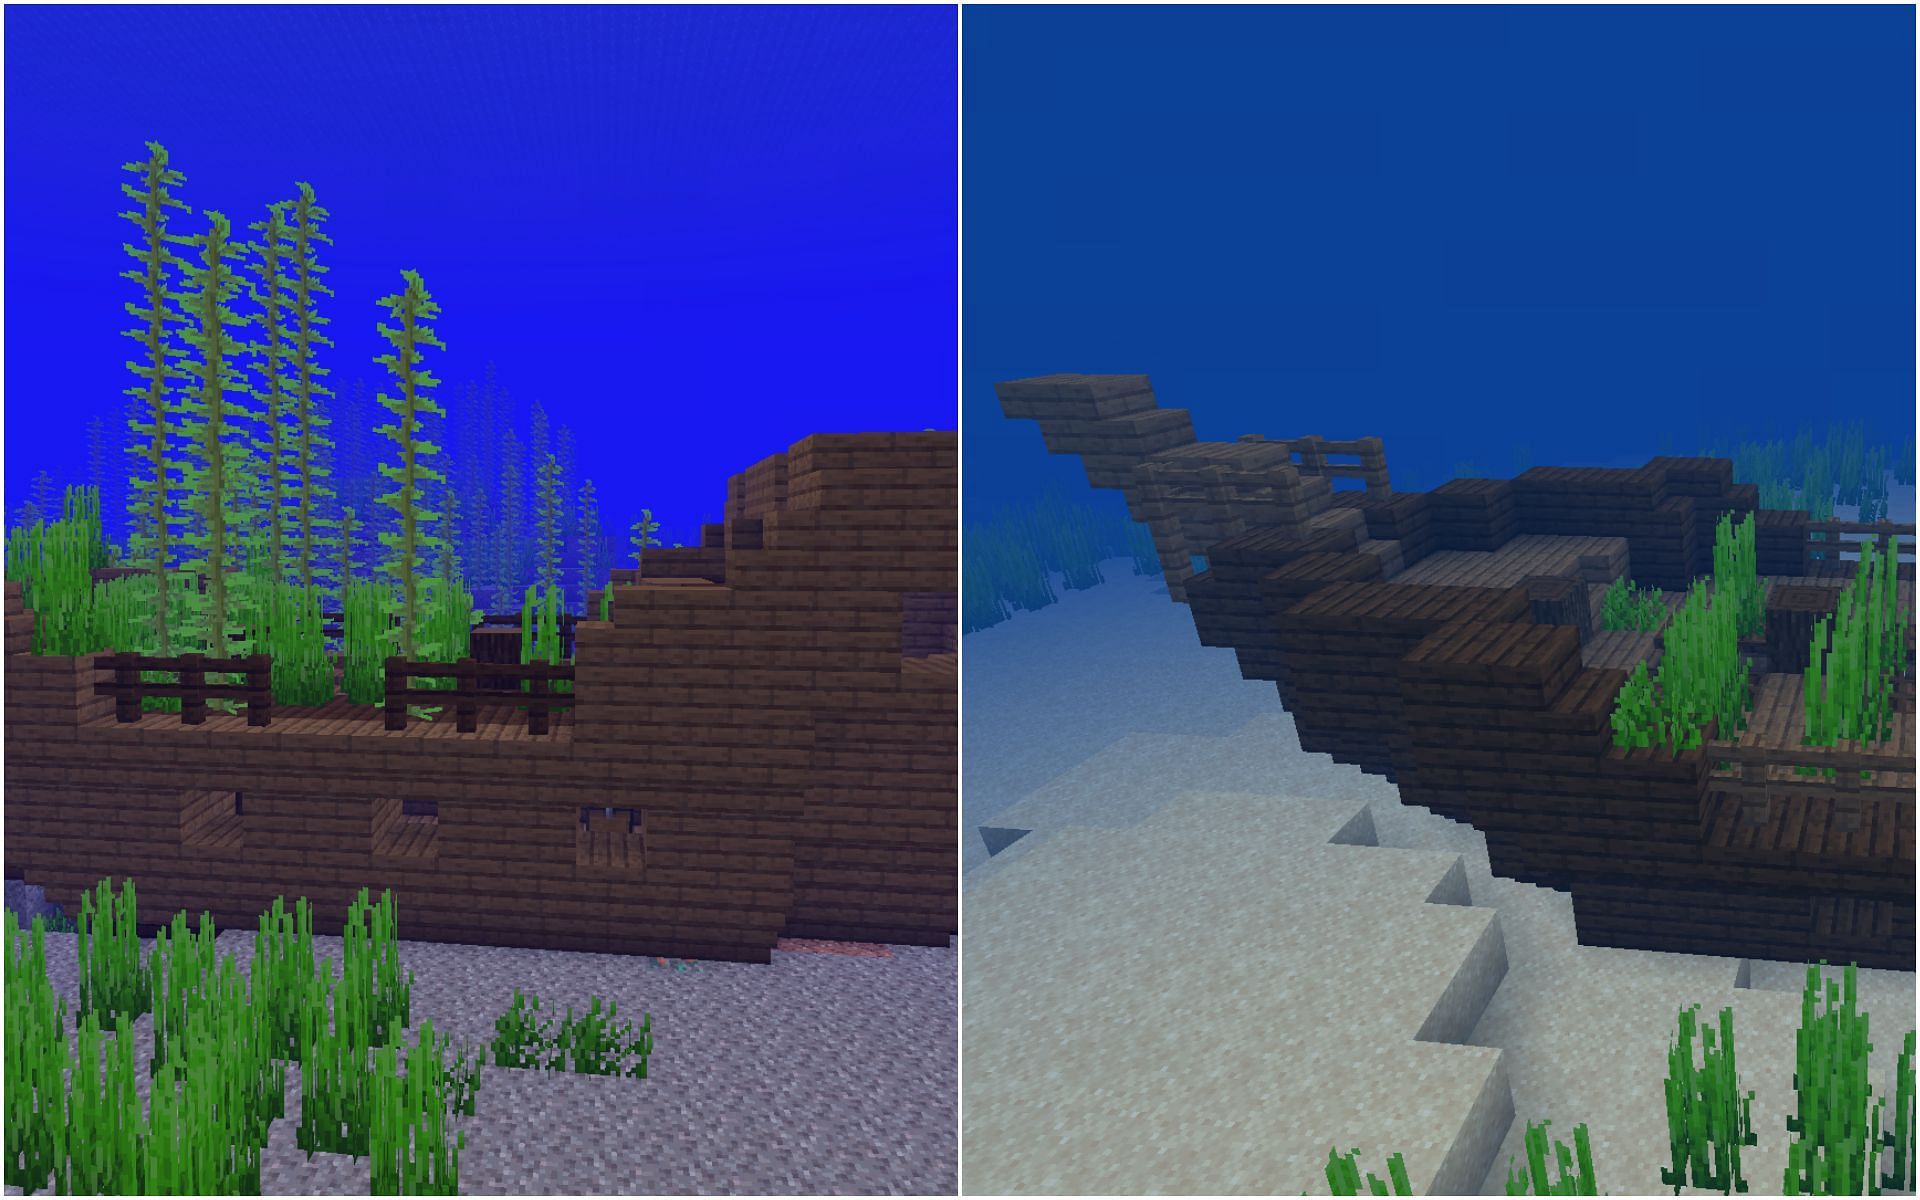 Players can get a great head start by finding shipwrecks early in Minecraft 1.19 update (Image via Sportskeeda)